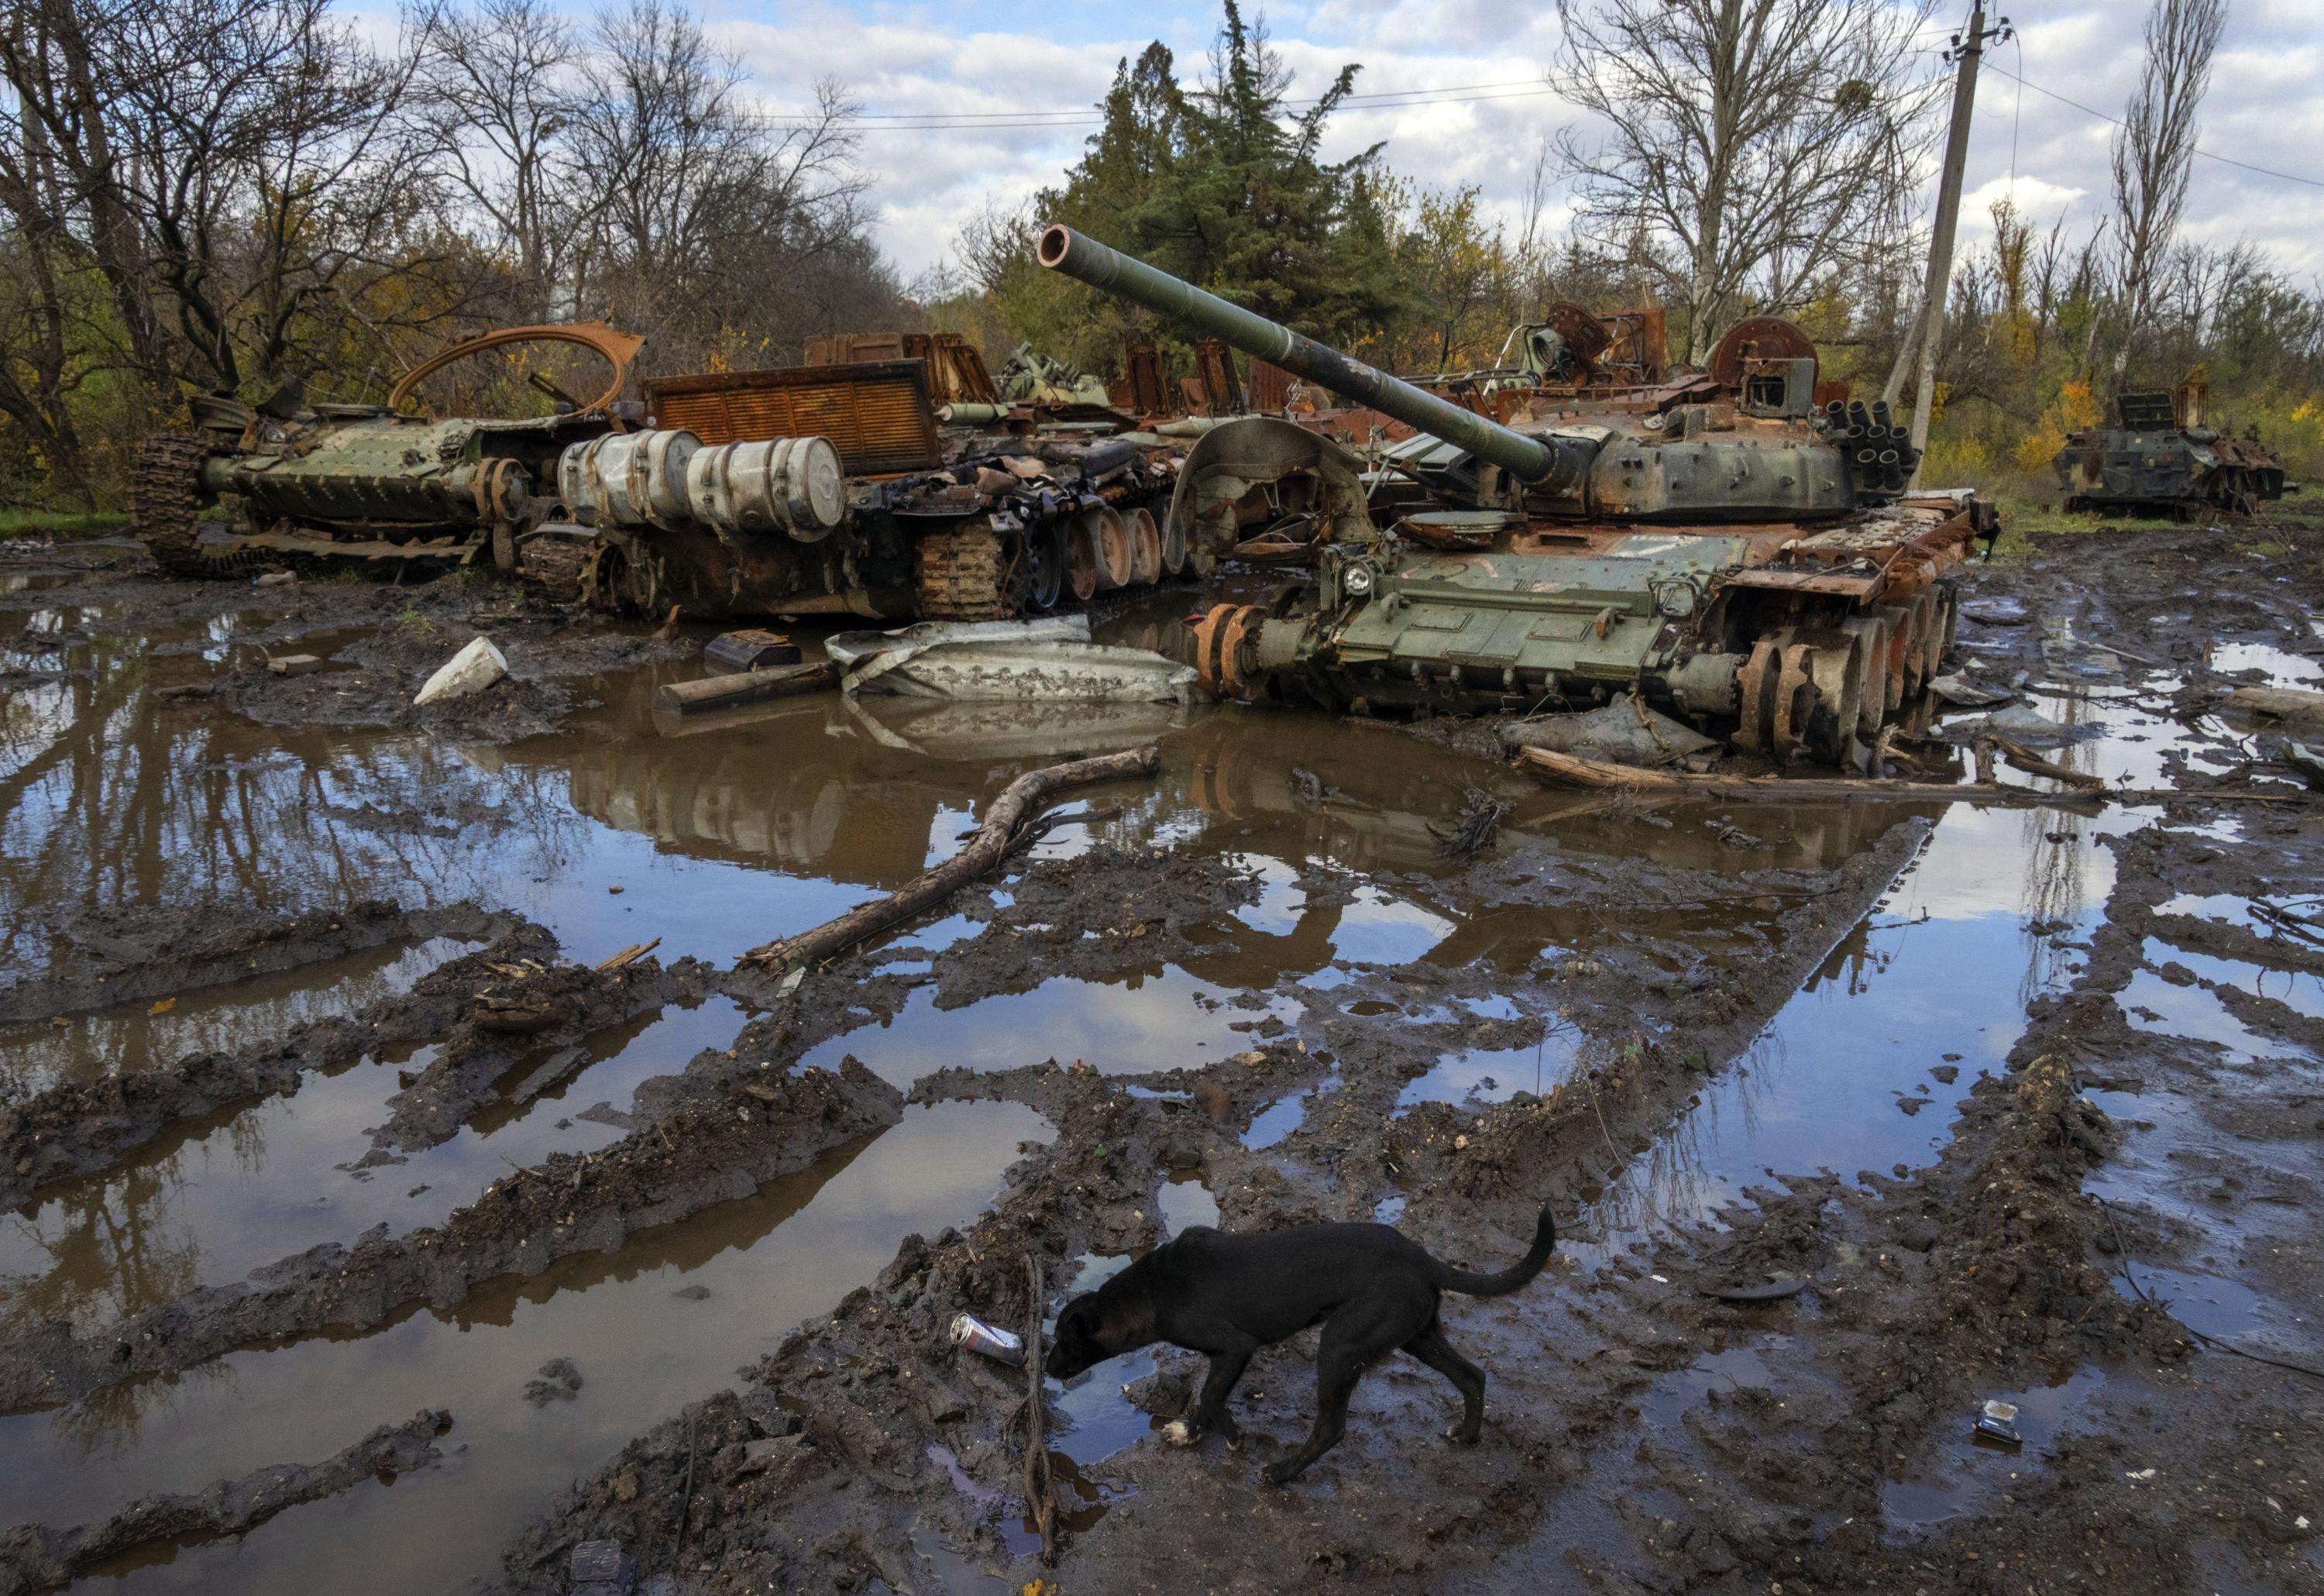 image for Heavy Russian barrage on Ukraine, no water for much of Kyiv